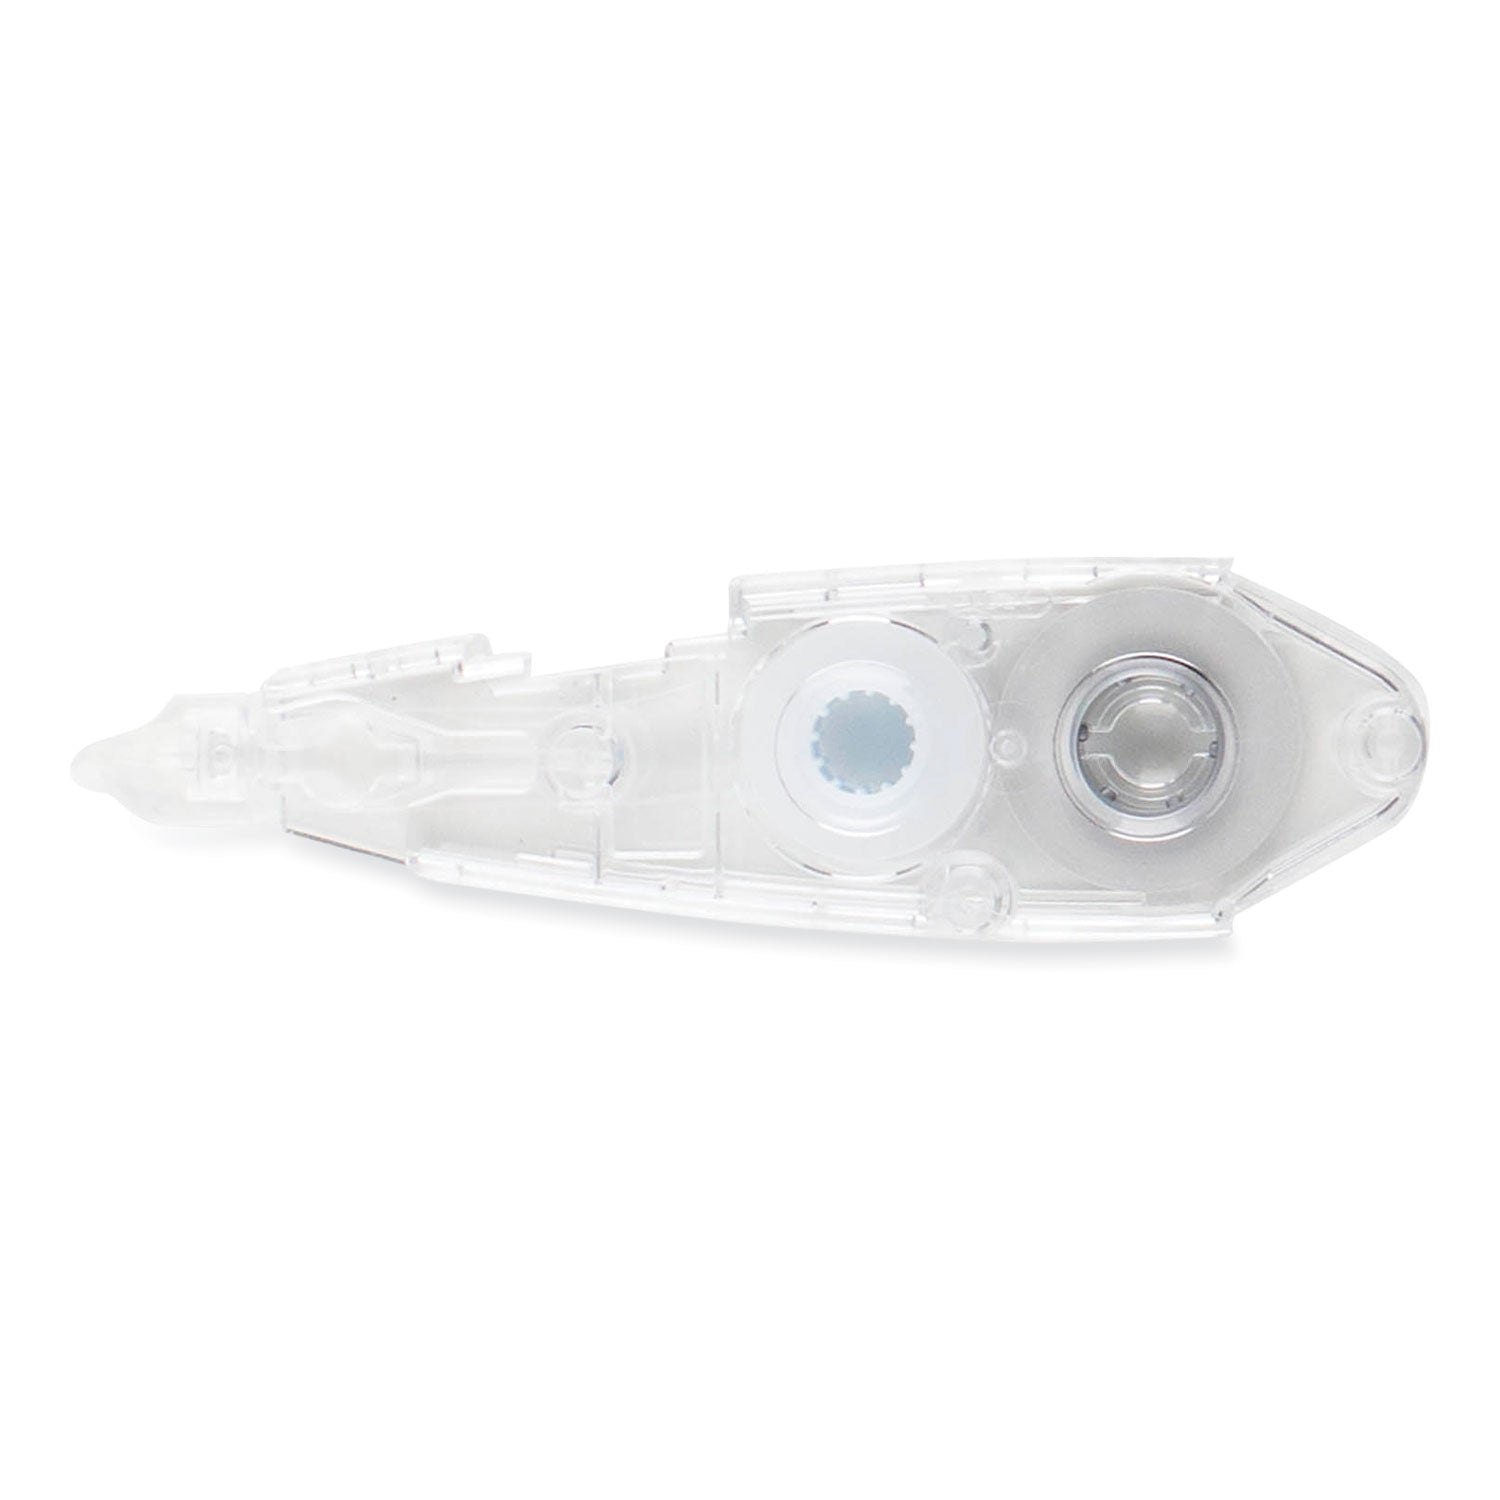 mono-air-pen-type-correction-tape-refillable-clear-applicator-019-x-236_tom68696 - 2